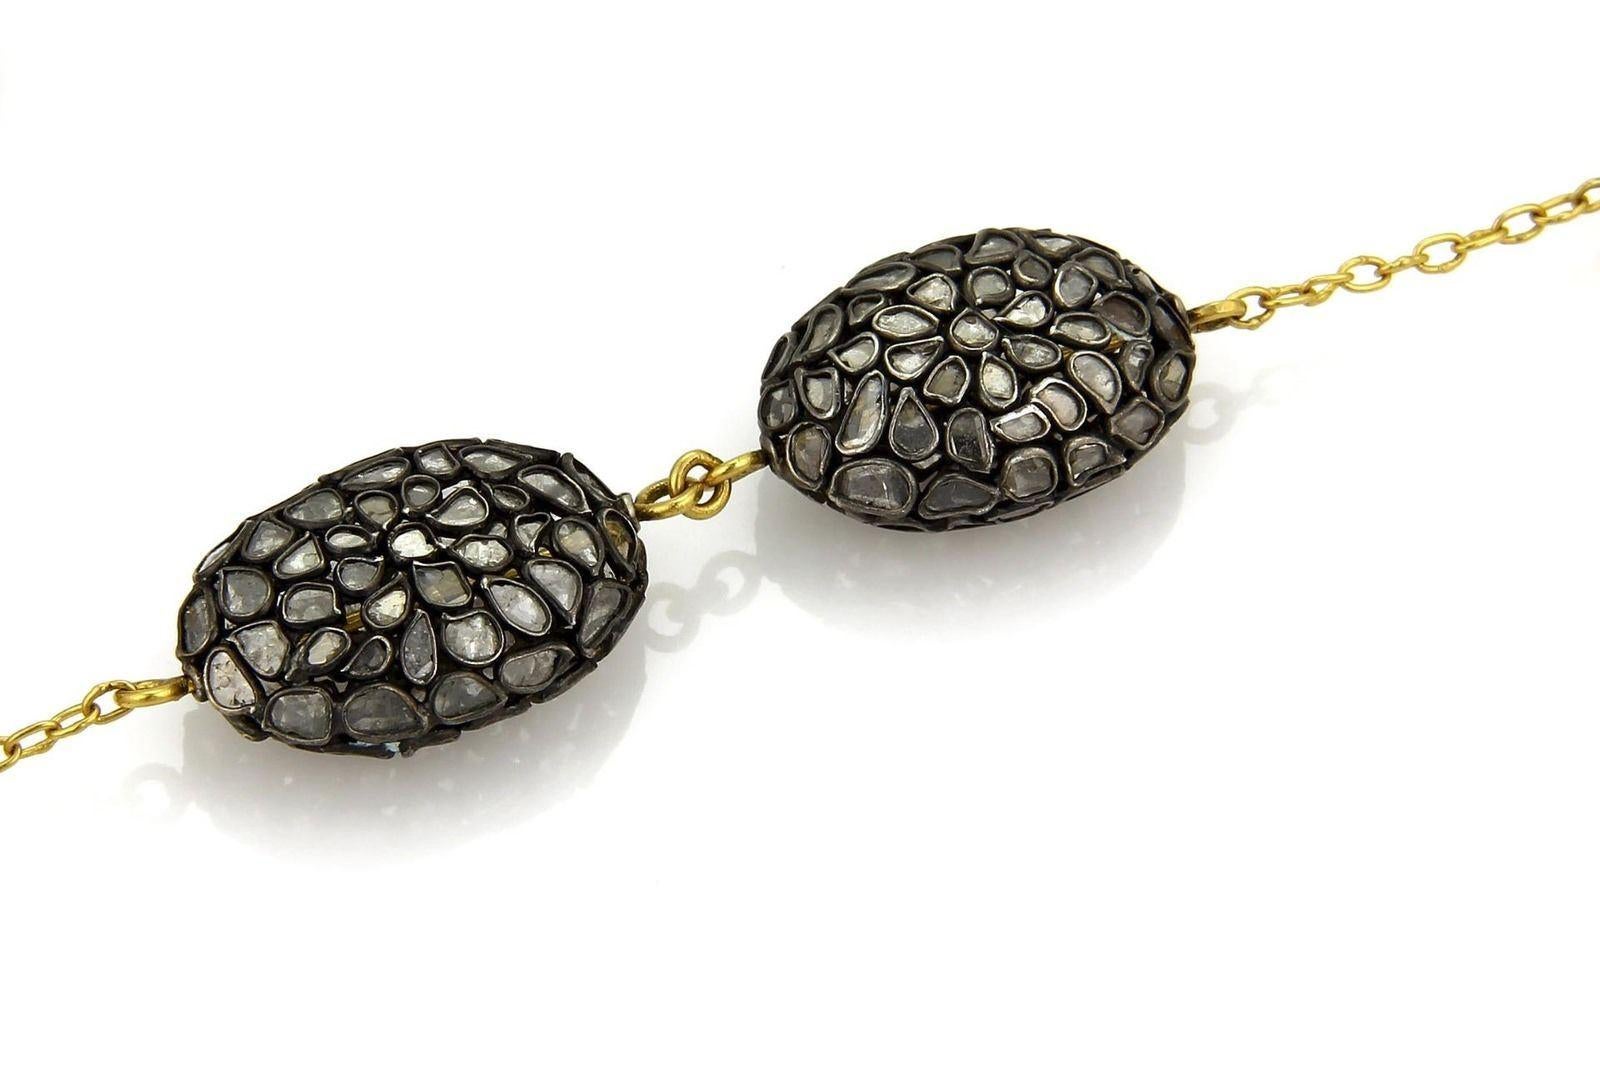 This is an impressive authentic necklace by Gurhan from the PASTICHE collection. It is crafted from 24k gold and sterling silver in black rhodium. It features 3 hand hammered oval beads in yellow gold with 6 pastiche pods in darkened silver with